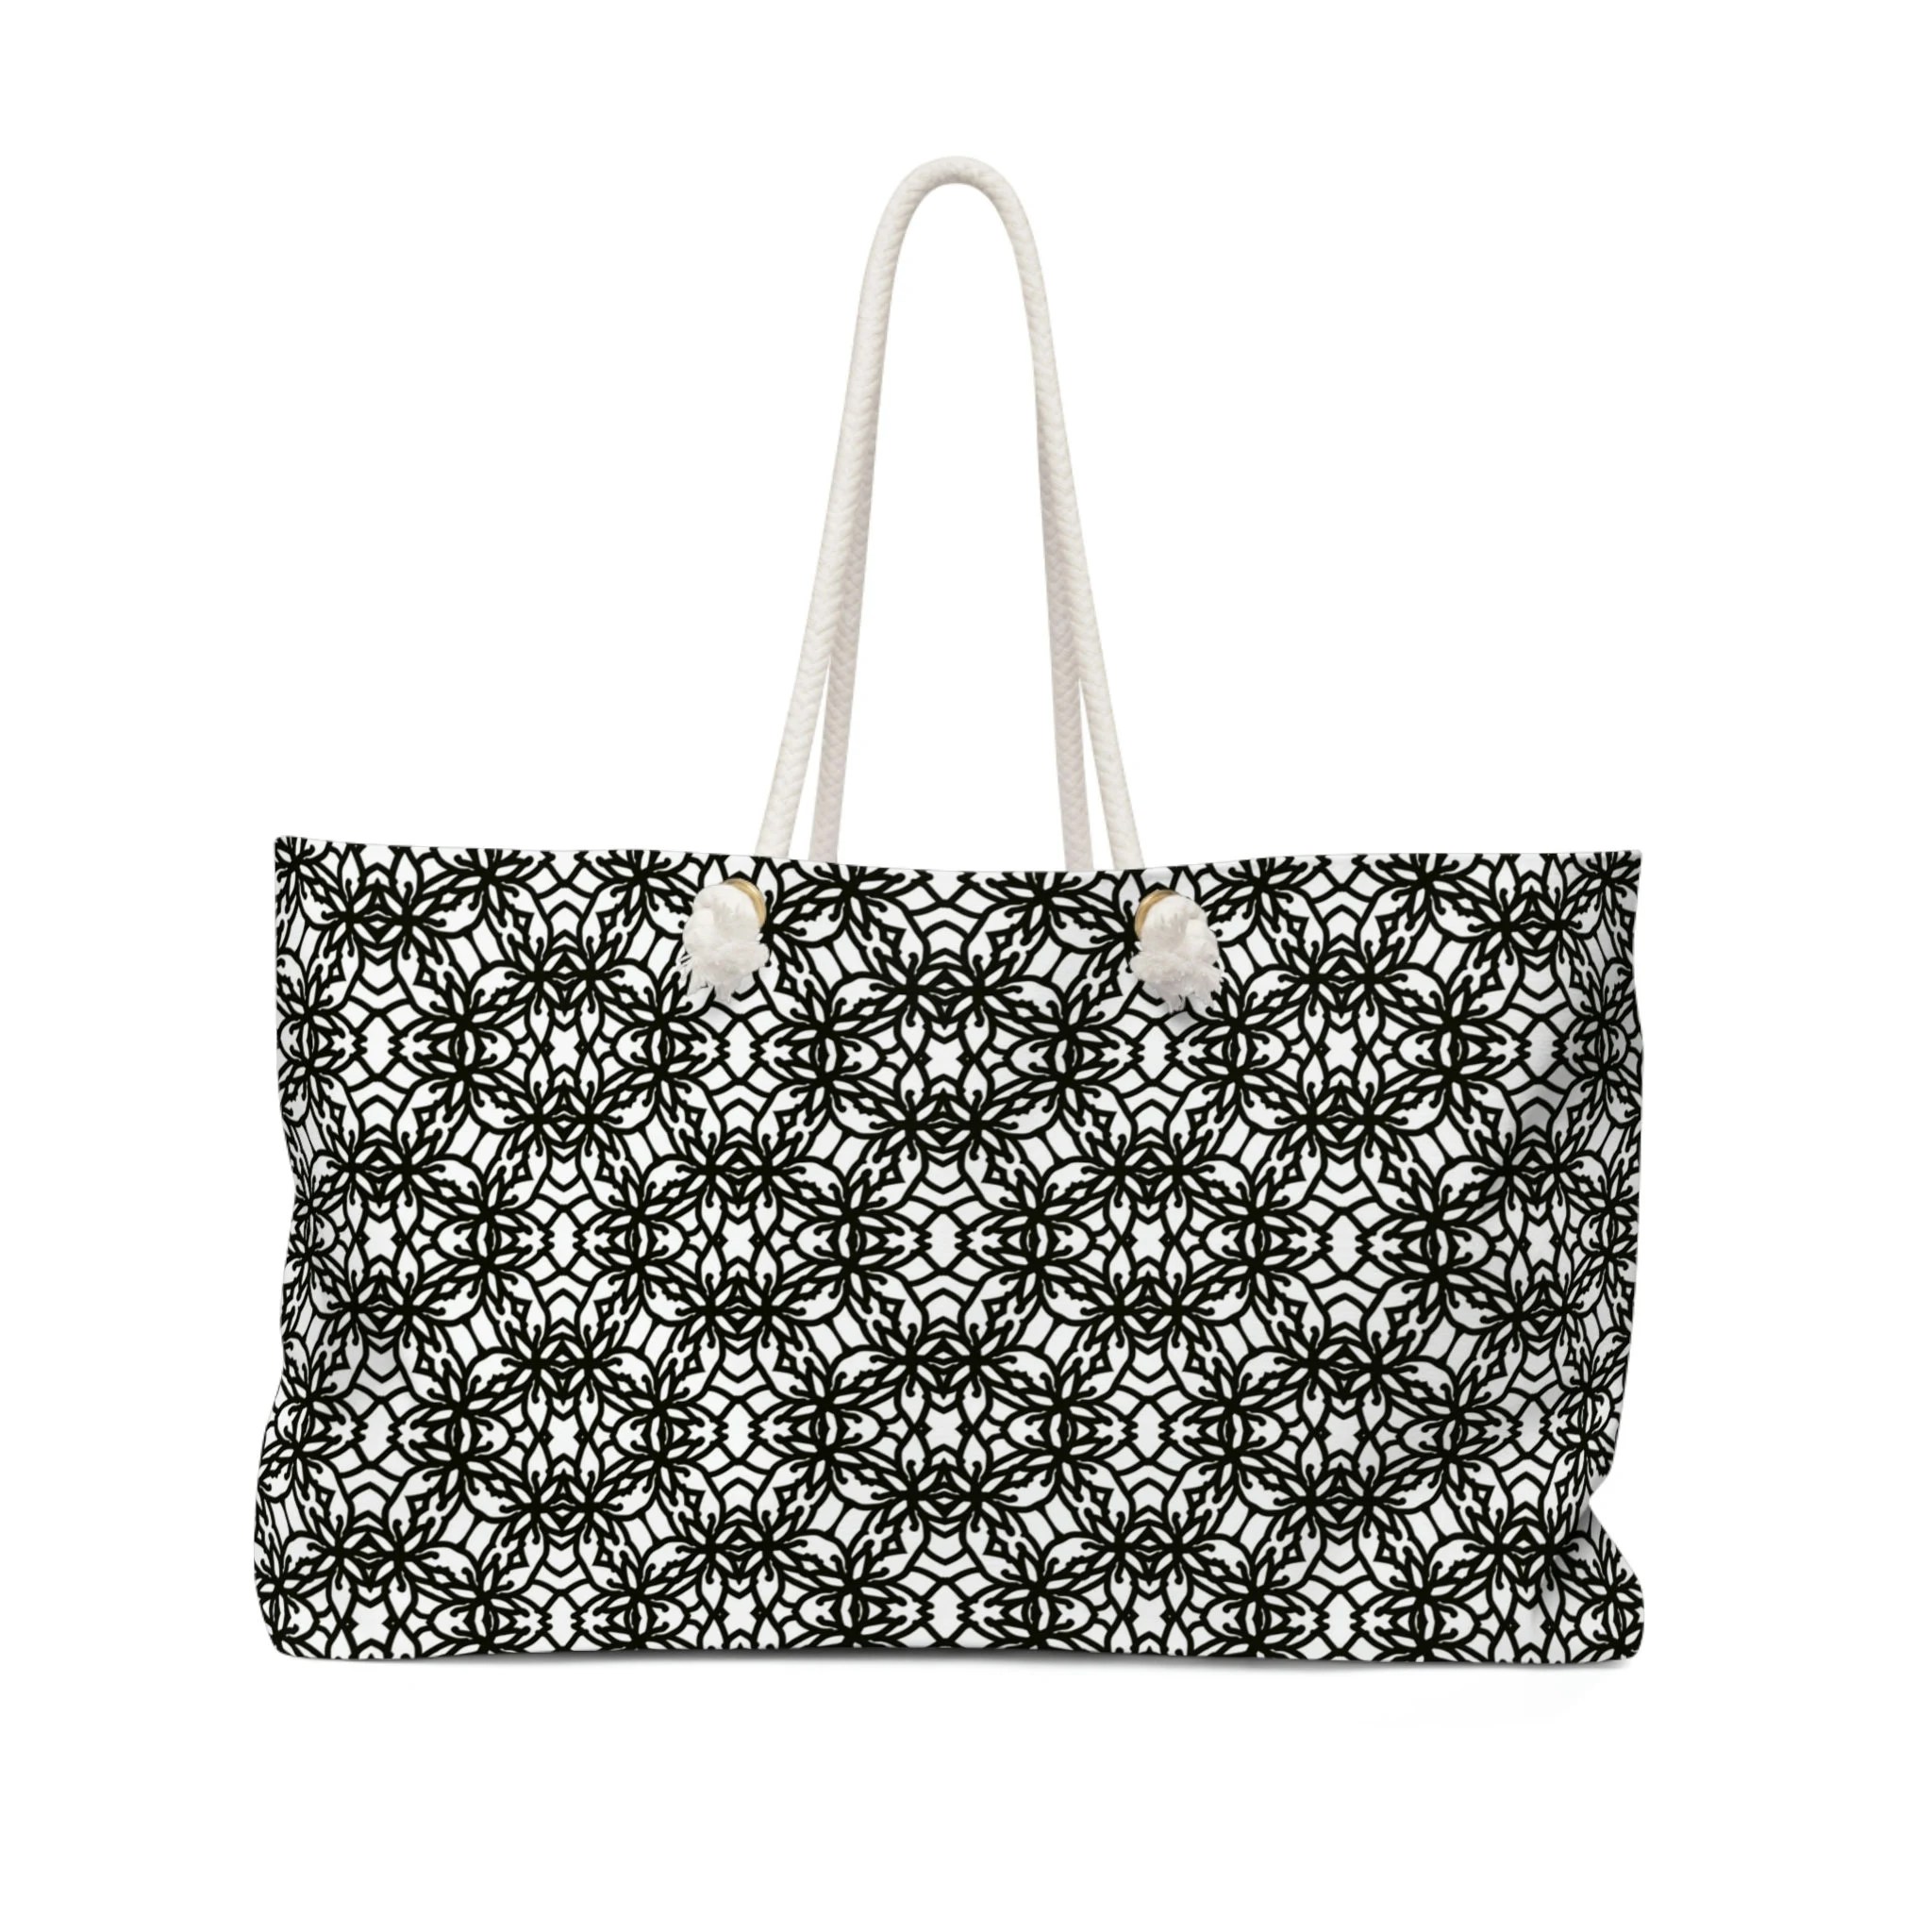 Weekender Tote Bag With Rope Handles + Lined Interior | Ebony & Ivory Black White